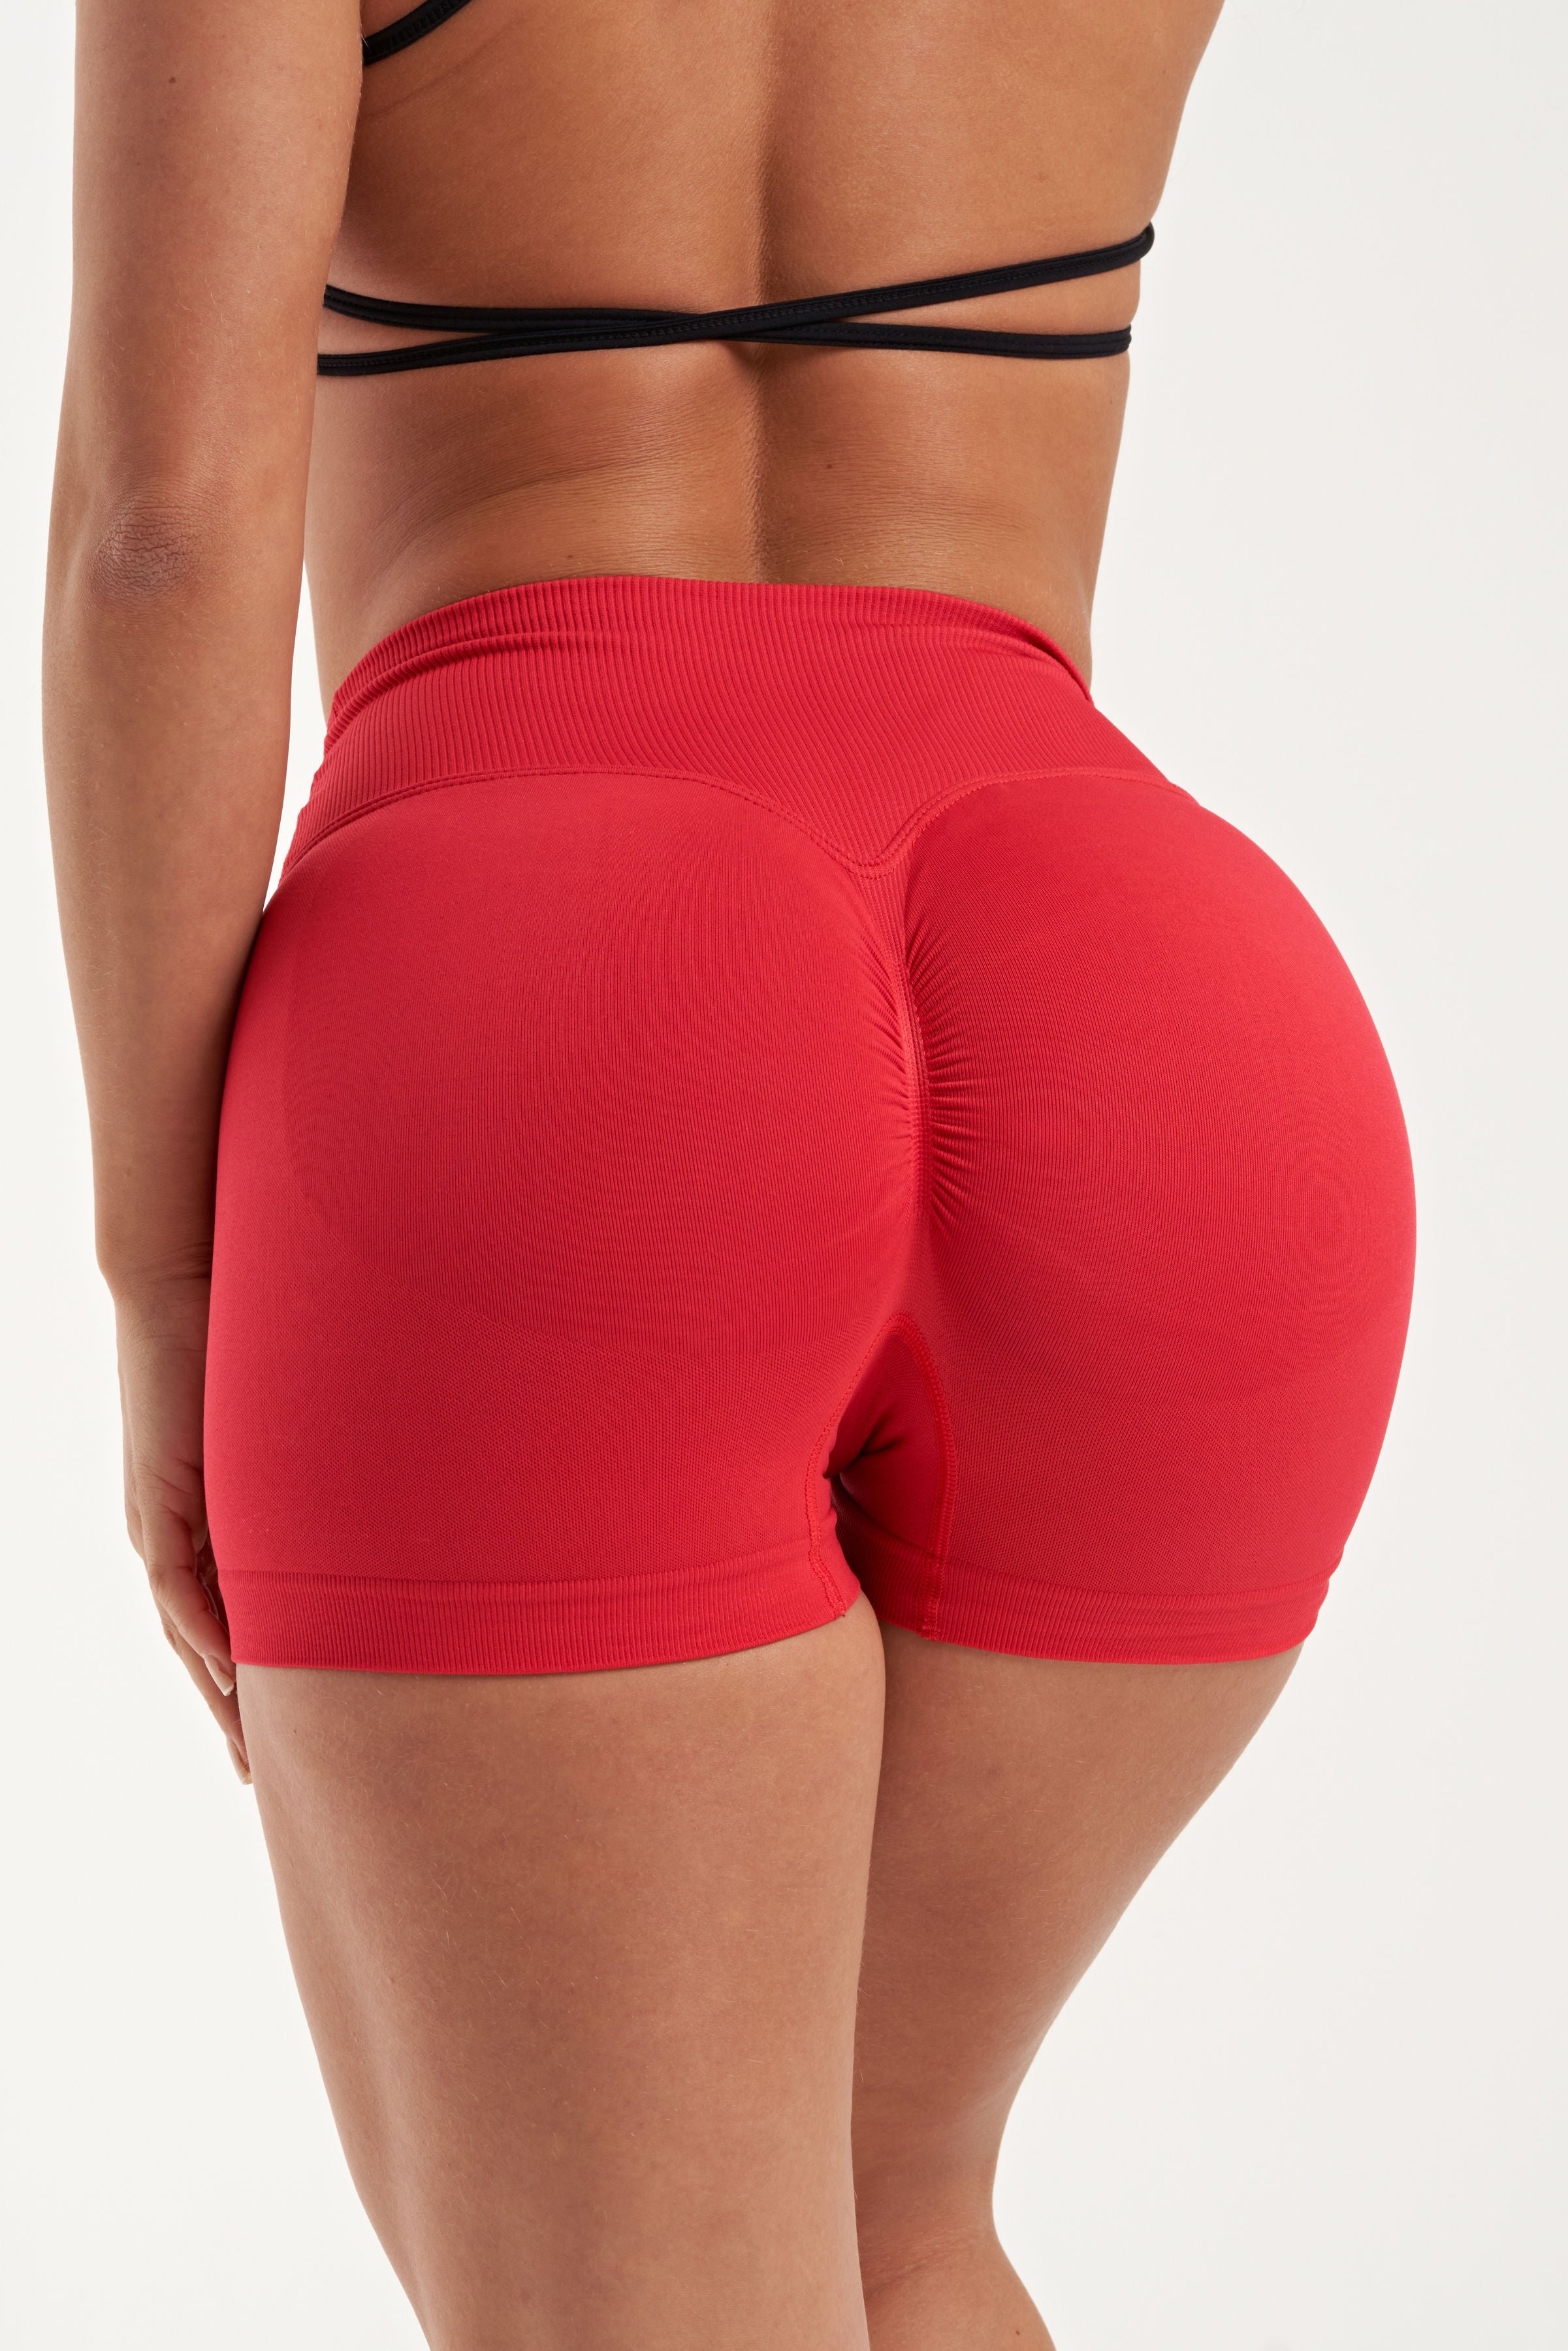 Day-to-day Scrunch Bum Shorts in Red